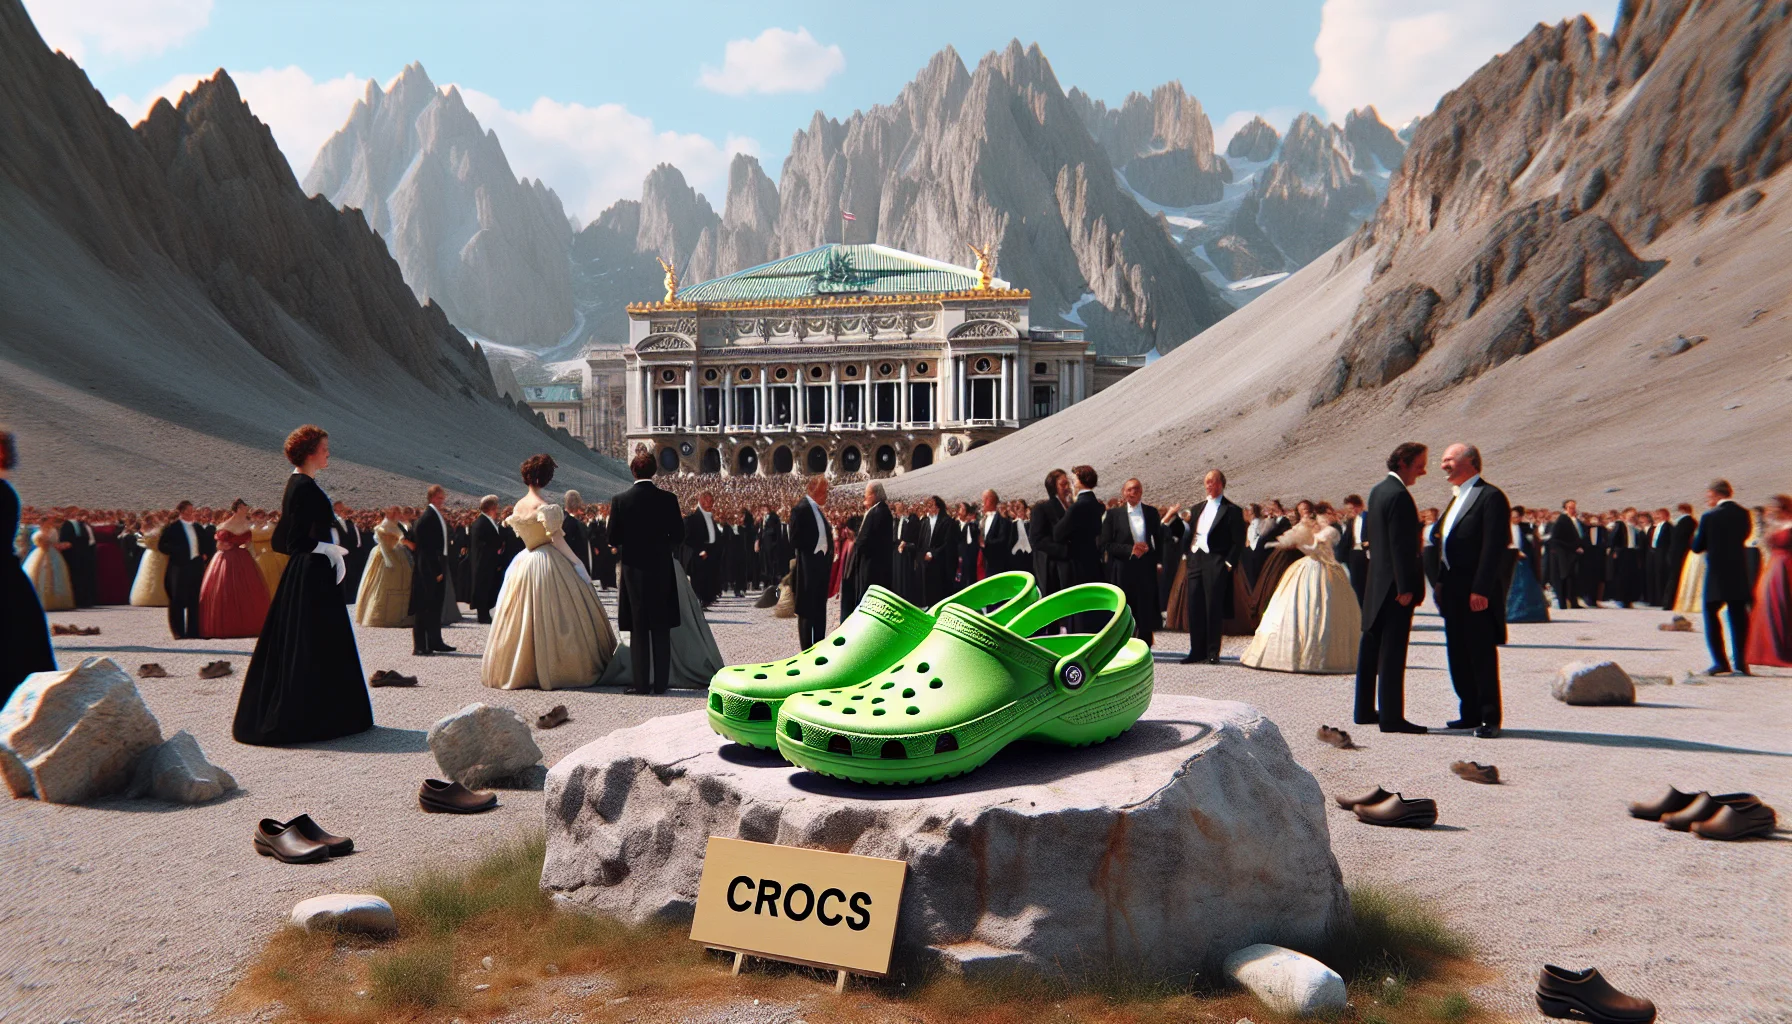 Generate a humorous, realistic image where a pair of neon green crocs shoes are oddly out of place. Perhaps they're perched on a mountain top amongst a field of solemnly grim, rocky peaks or floating in the heart of a formal grand opera house party, eliciting laughter and curiosity among a crowd of elegantly dressed people. The signboard nearby reads 'Crocs', humorously implying an unexpected product placement.